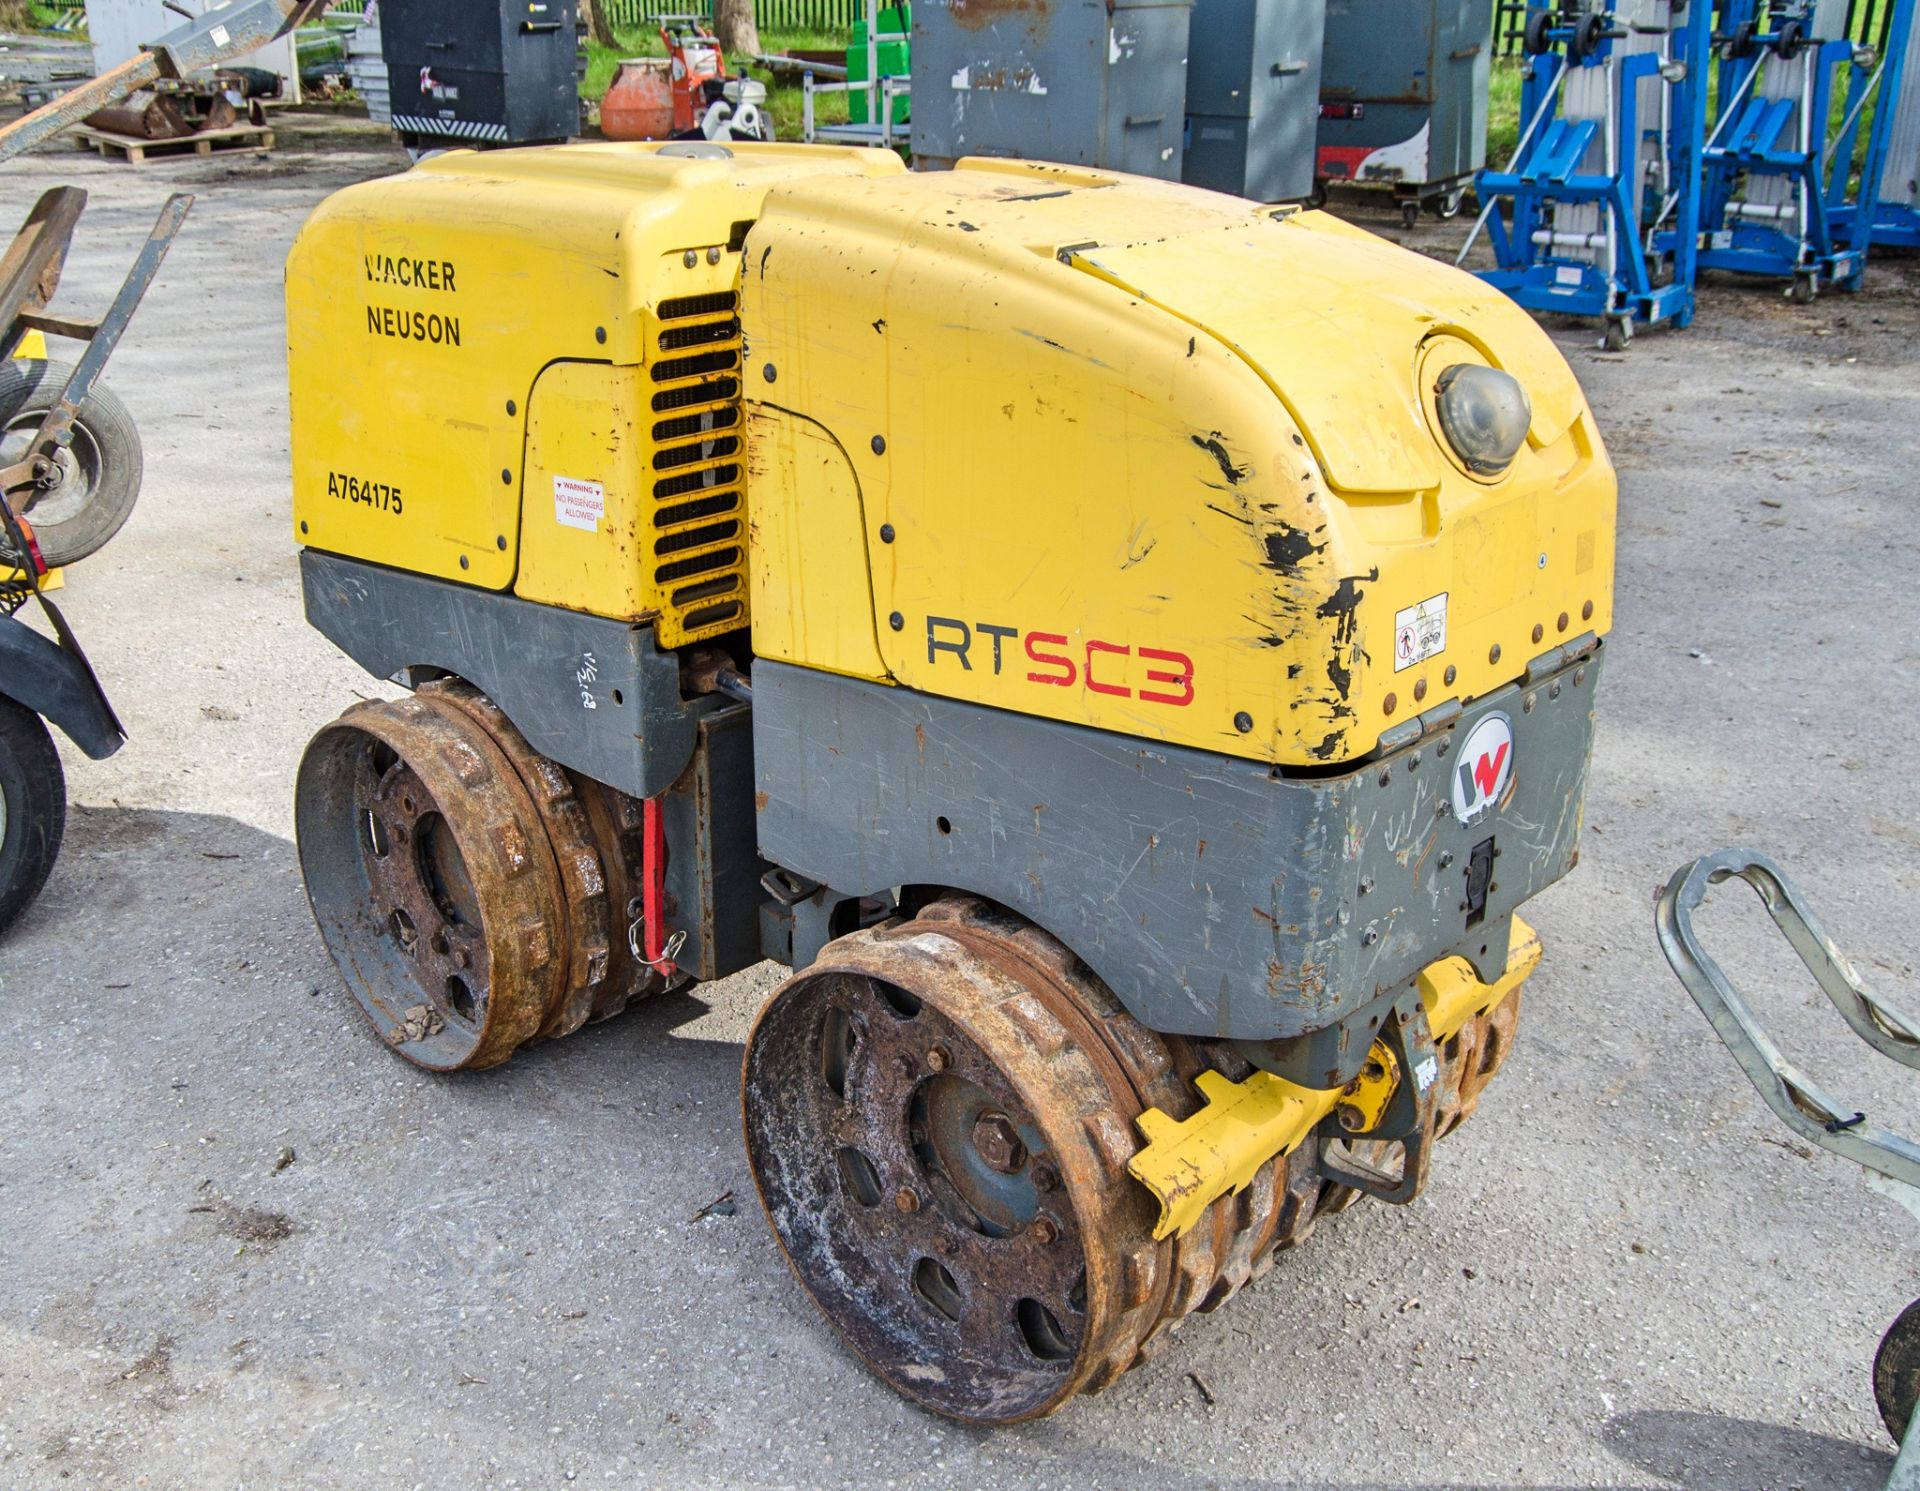 Wacker Neuson RTSC3 diesel driven trench roller Year: 2016 S/N: 24326124 Recorded Hours: 311 - Image 4 of 10